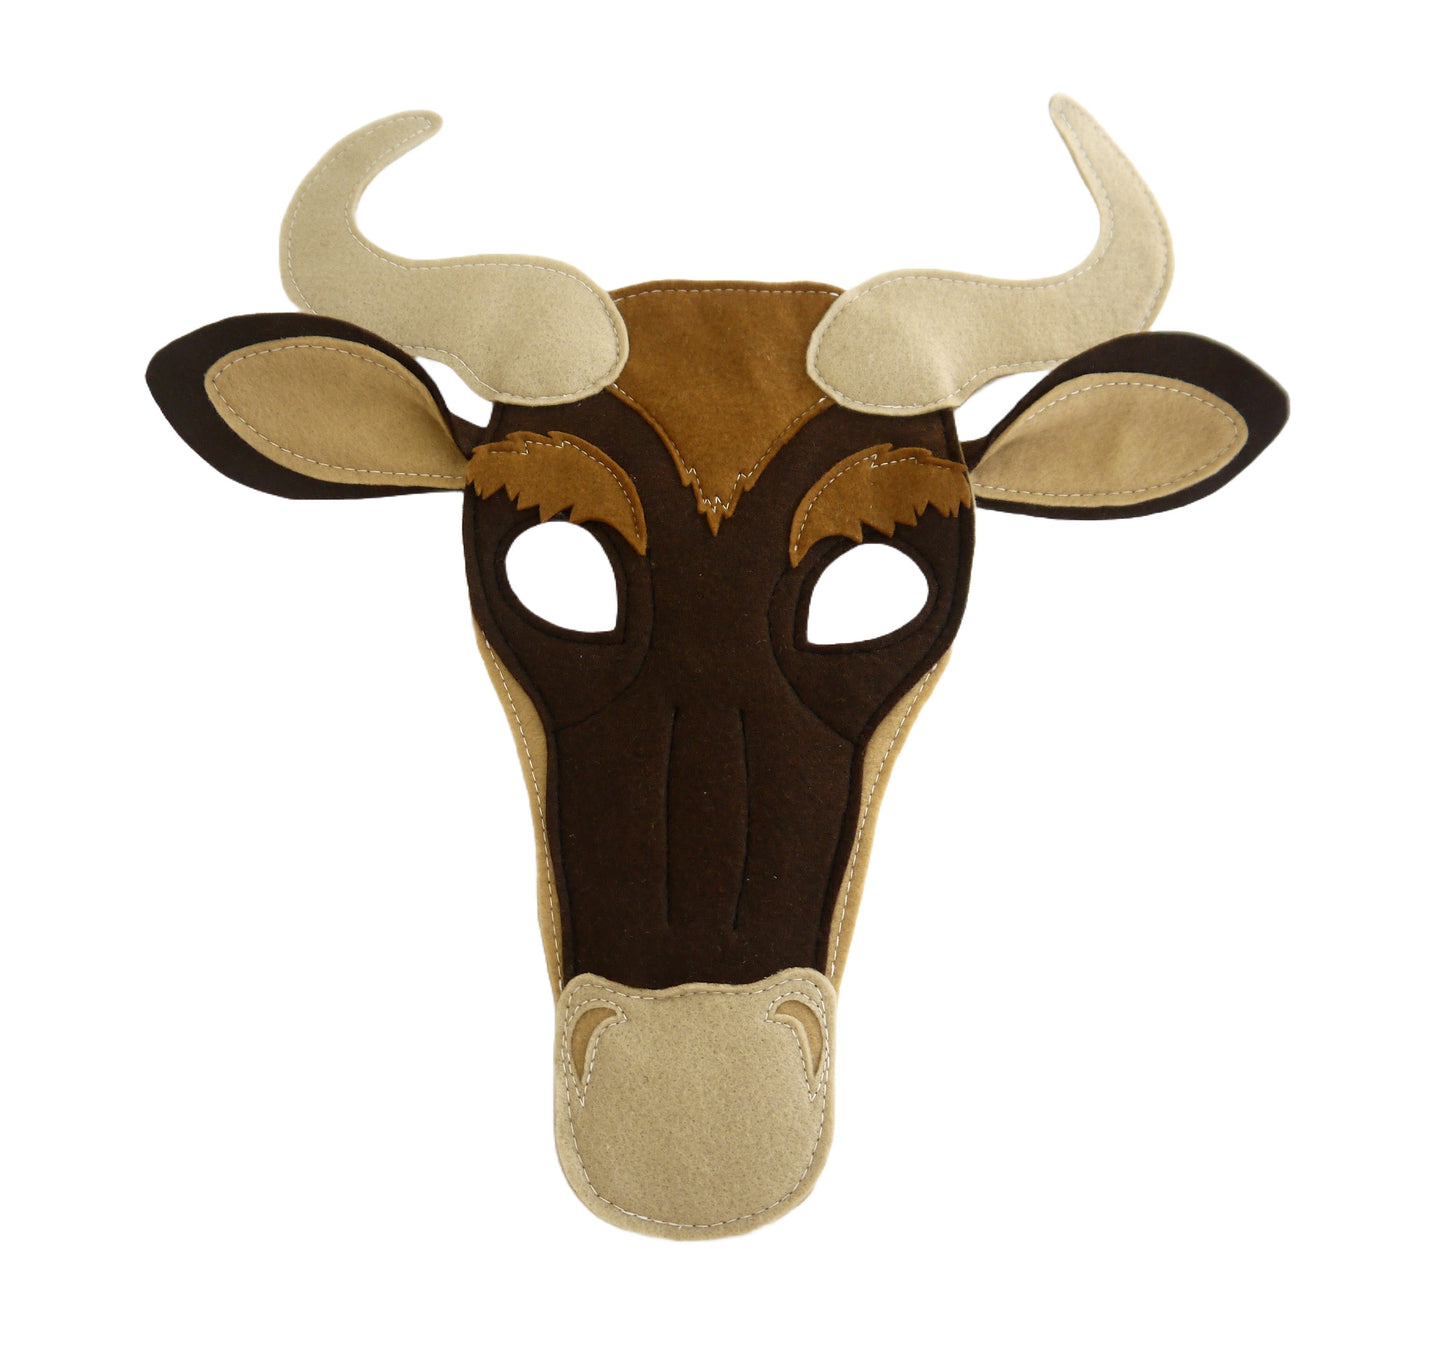 Wildebeest costume mask, Theatre production, Headdress, men's boy's girl's gift, children's and adult size, Safari animal, book day